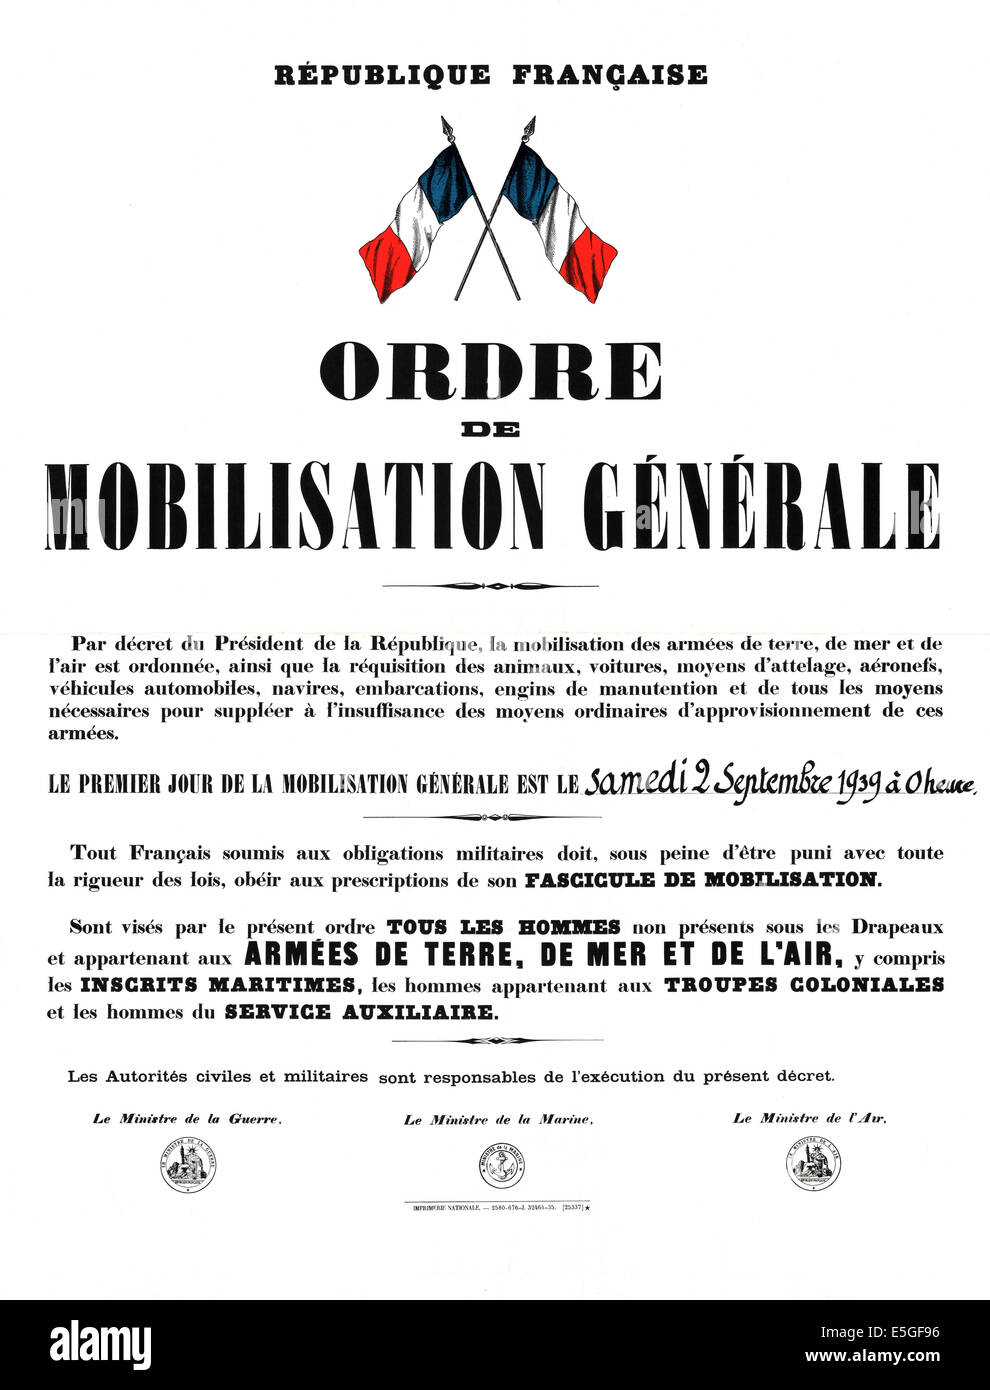 1939 French Government mobilisation order poster Stock Photo